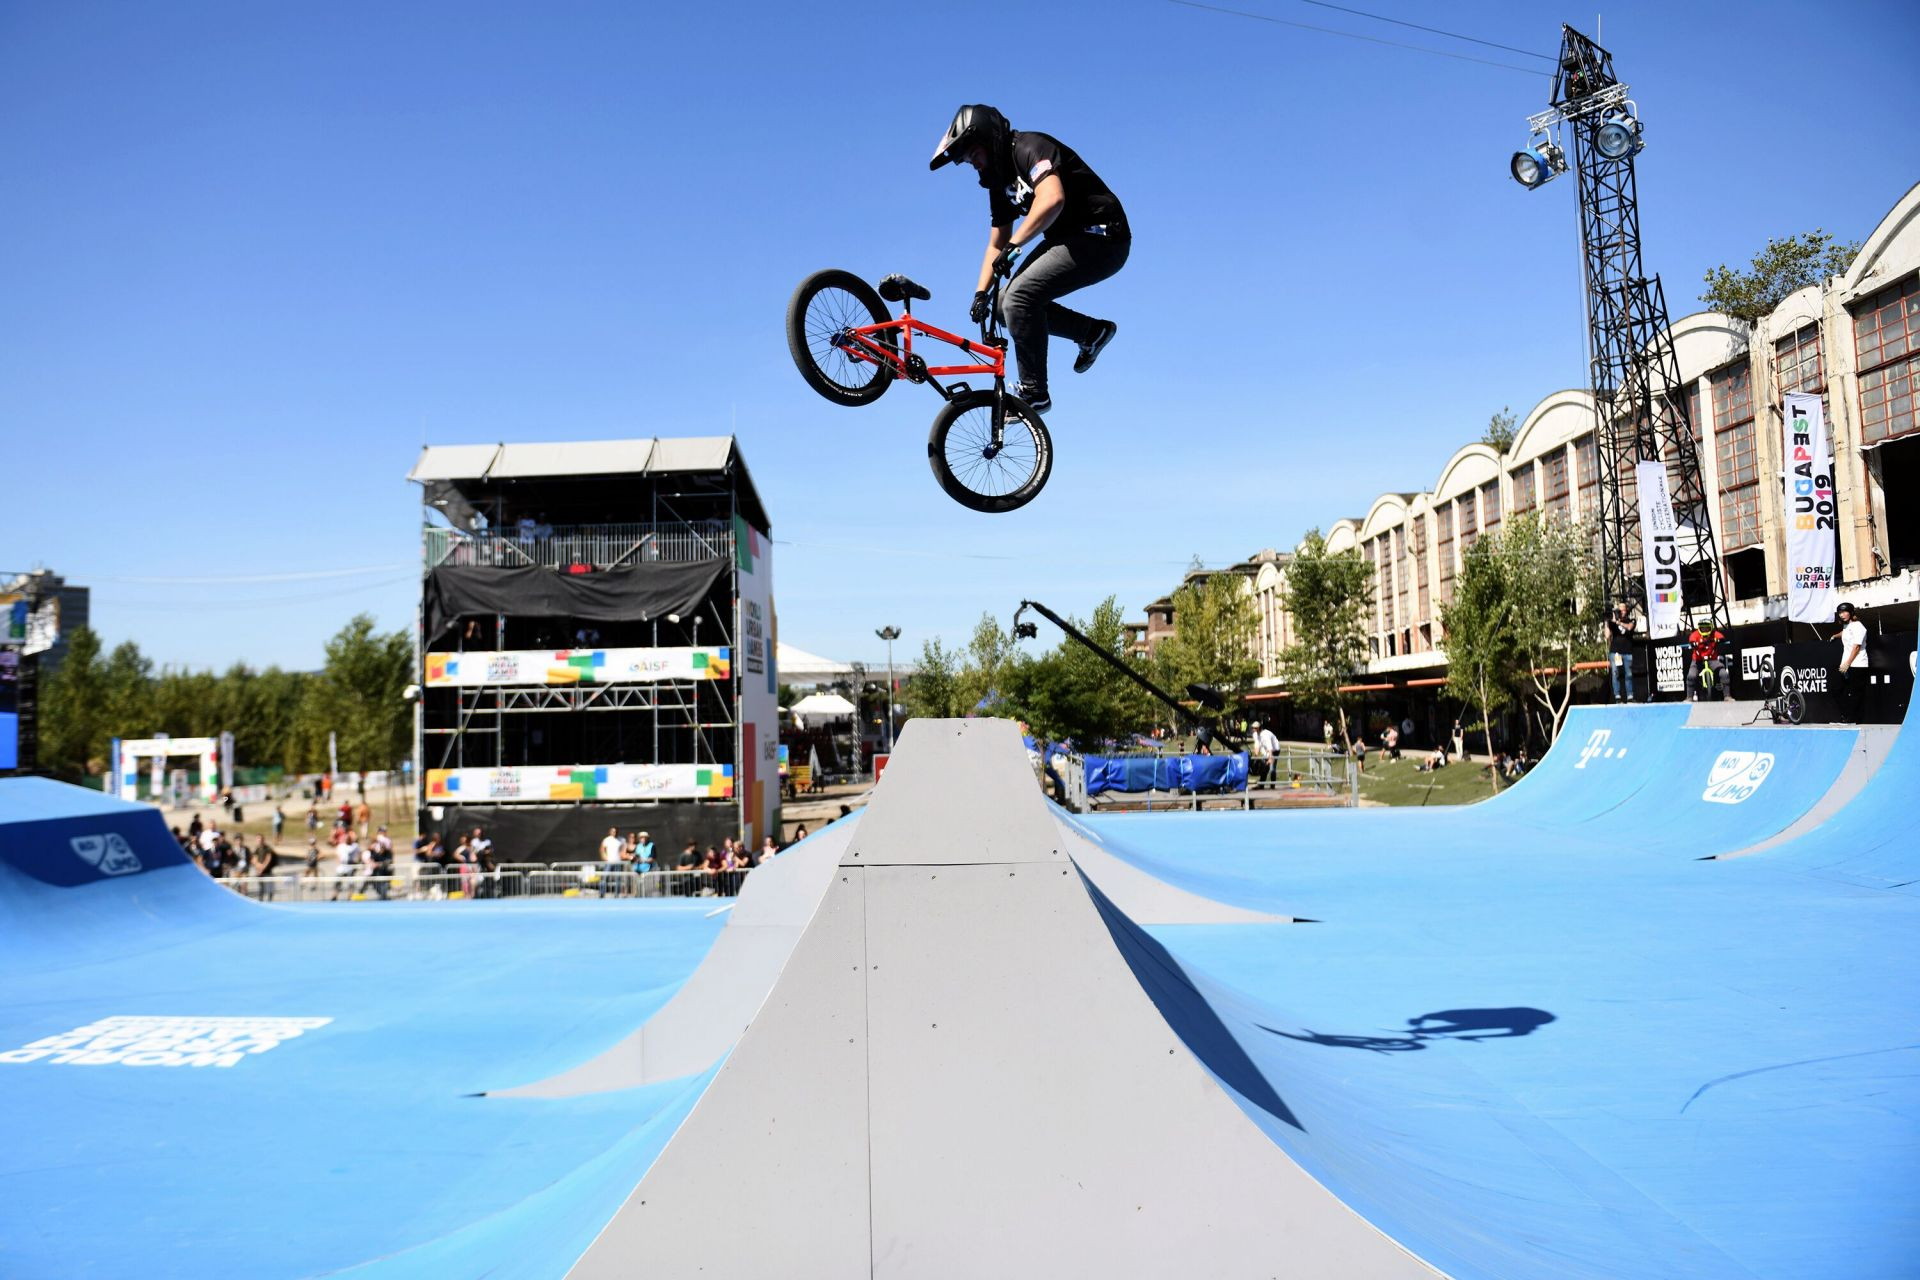 BMX and basketball titles earned as World Urban Games end